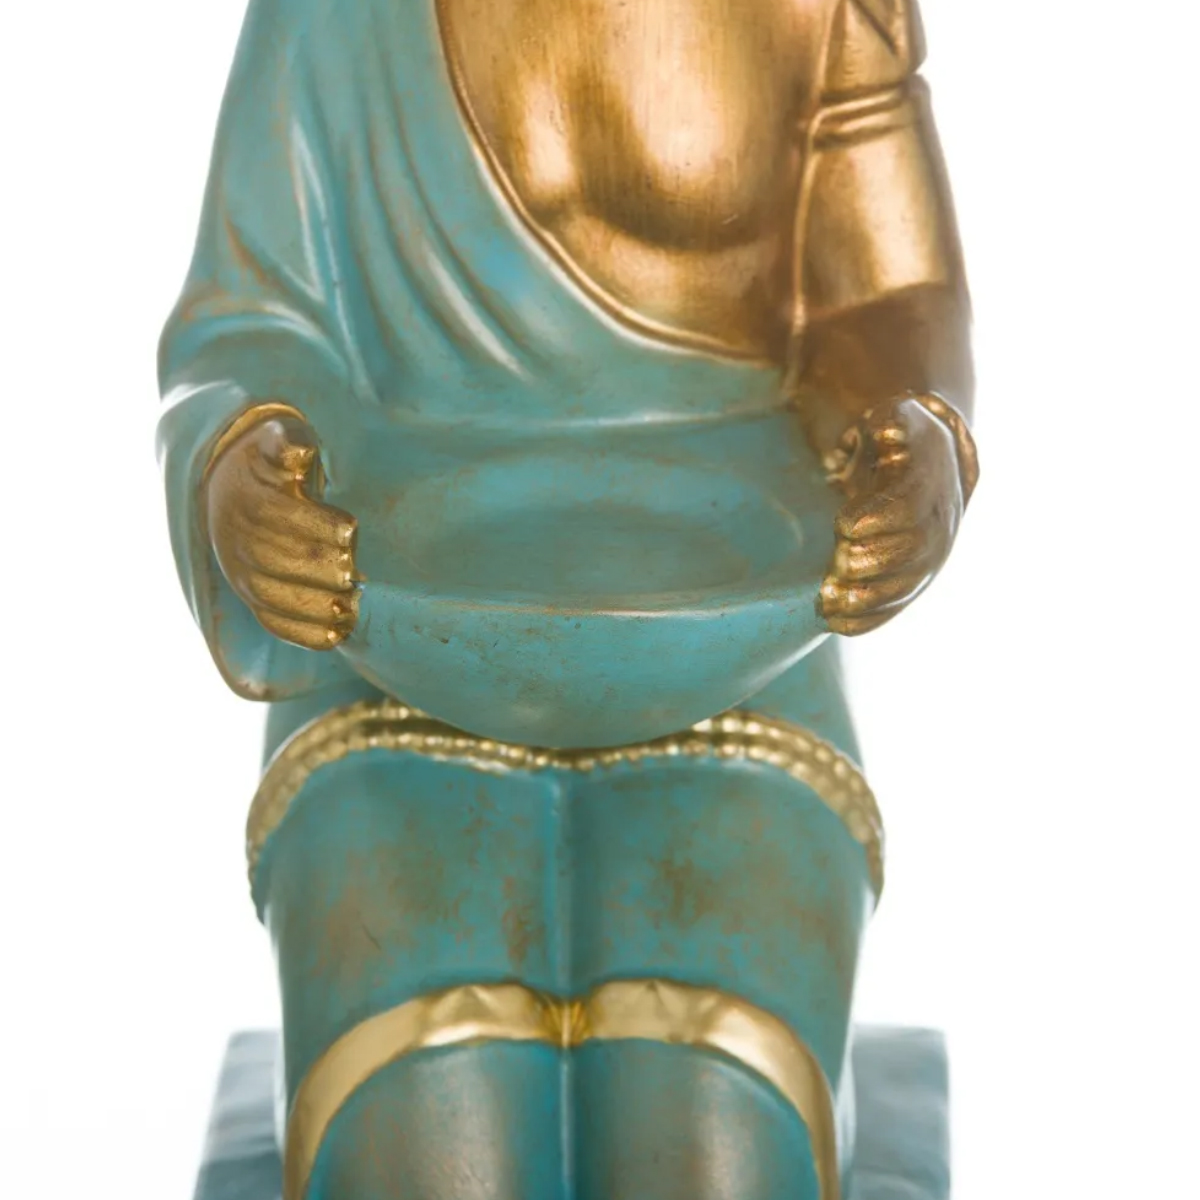 Gold and Turquoise Buddha Statue